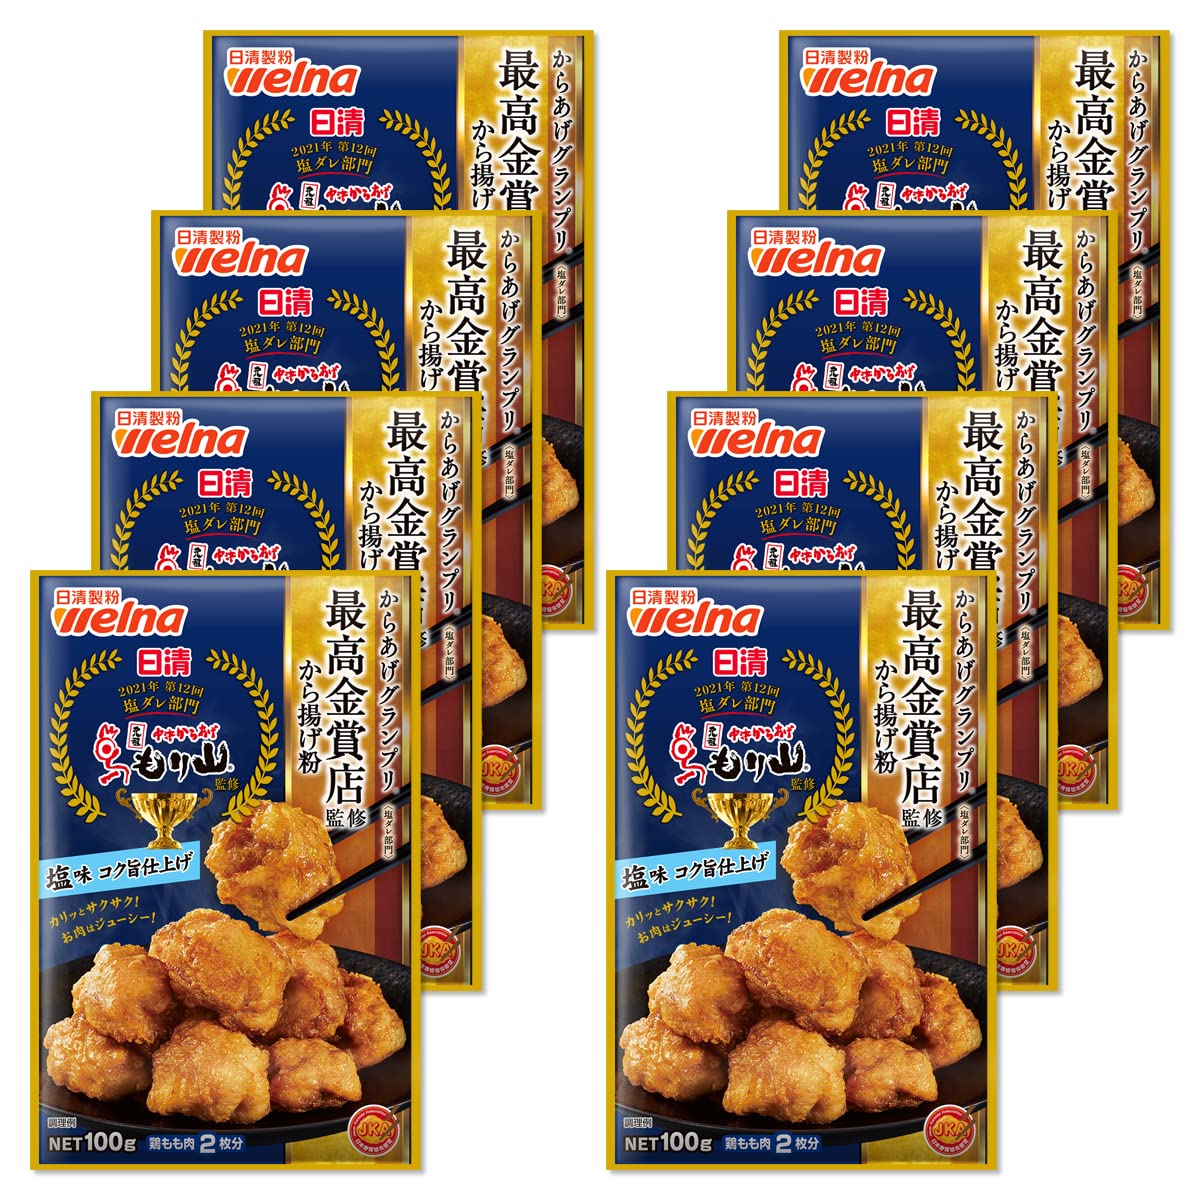 Nisshin Kara-age Grand Prix Grand Gold store deep-fried flour salty richness purport finish from supervision 100gX8 pieces